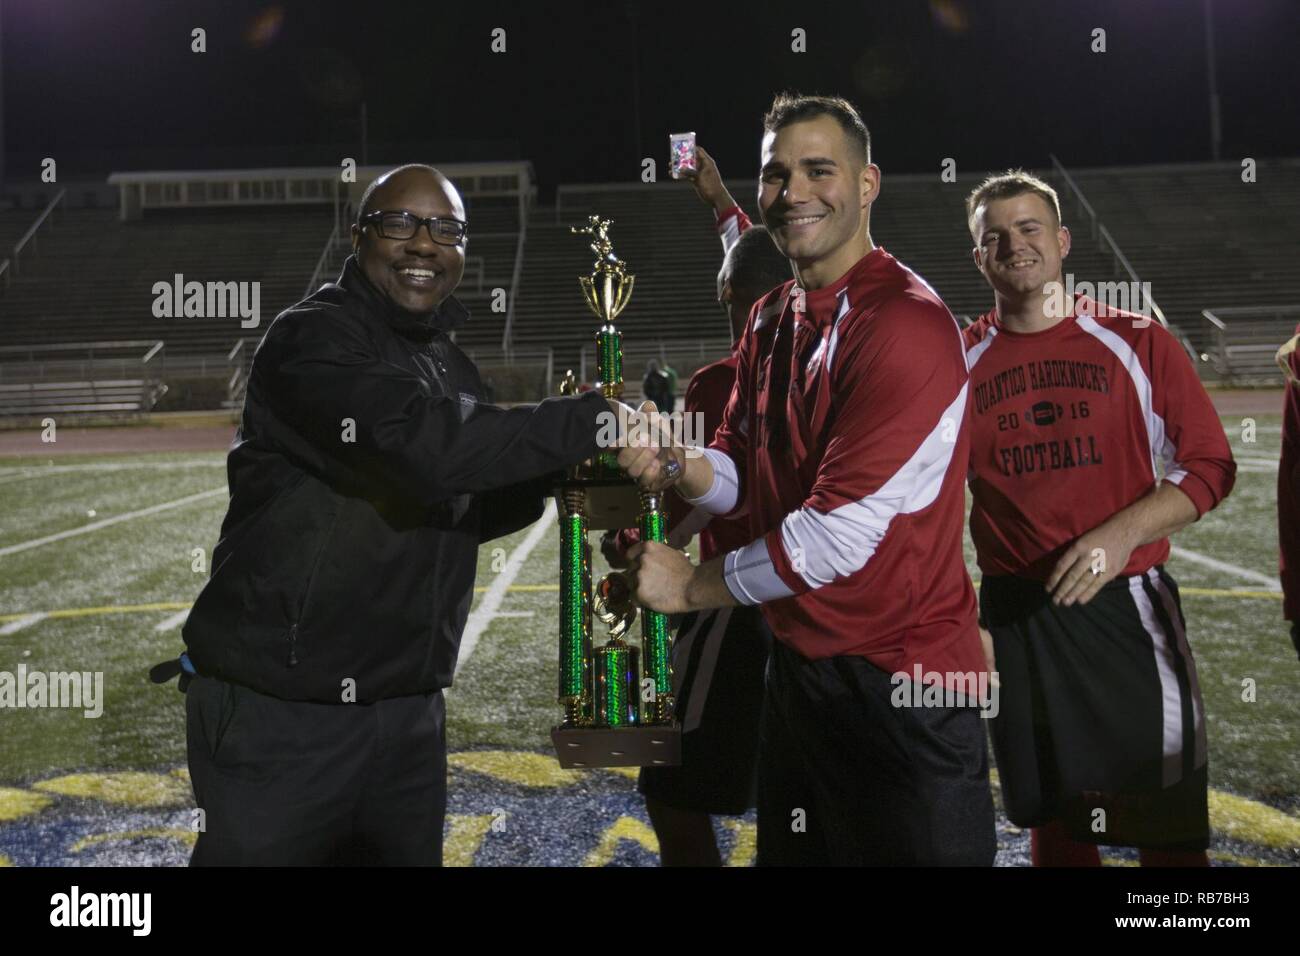 Joel Hines, left, director of the intramural sports program, Marine Corps Base Quantico (MCBQ), presents the first place trophy to the Base Motor Transport team during the Marine Corps Community Services Intramural Flag Football Championship Tournament at Butler Stadium, MCBQ, Va., Dec. 1, 2016. Marines from different units volunteer to compete in an intermural flag football league. Stock Photo